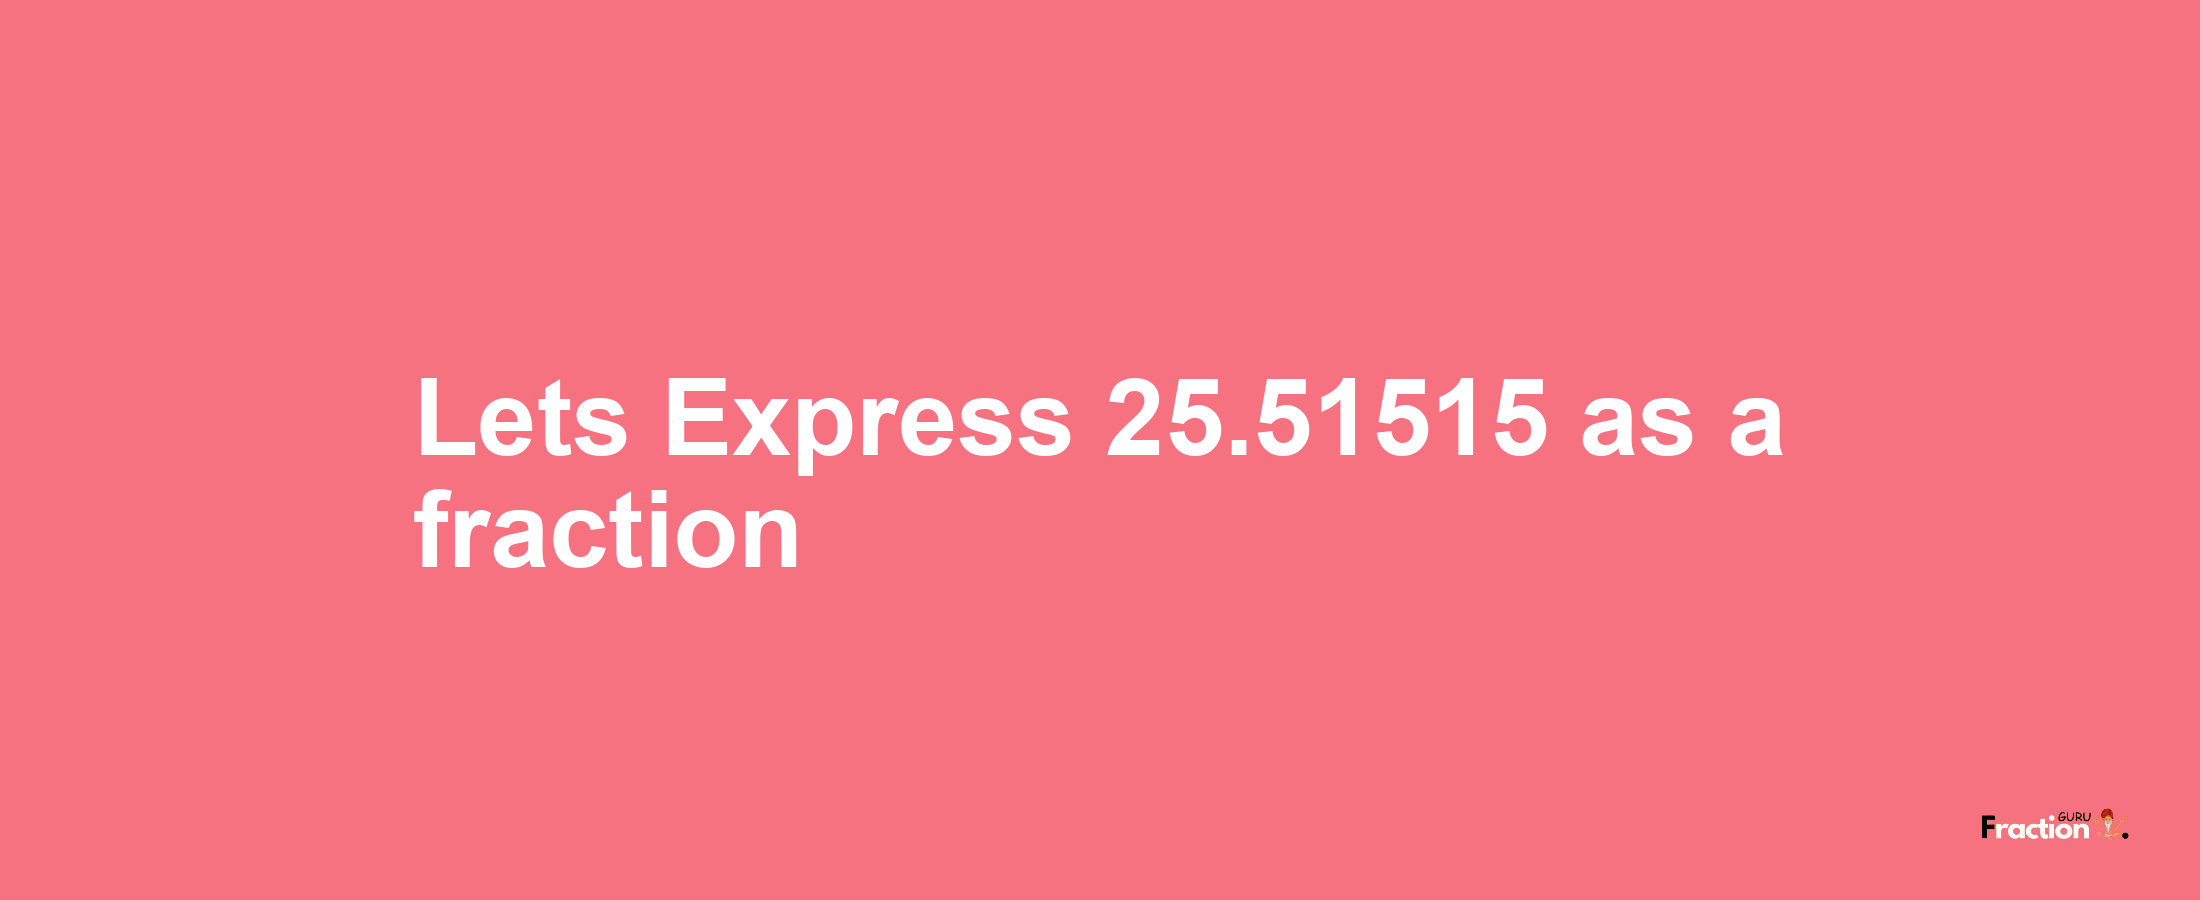 Lets Express 25.51515 as afraction